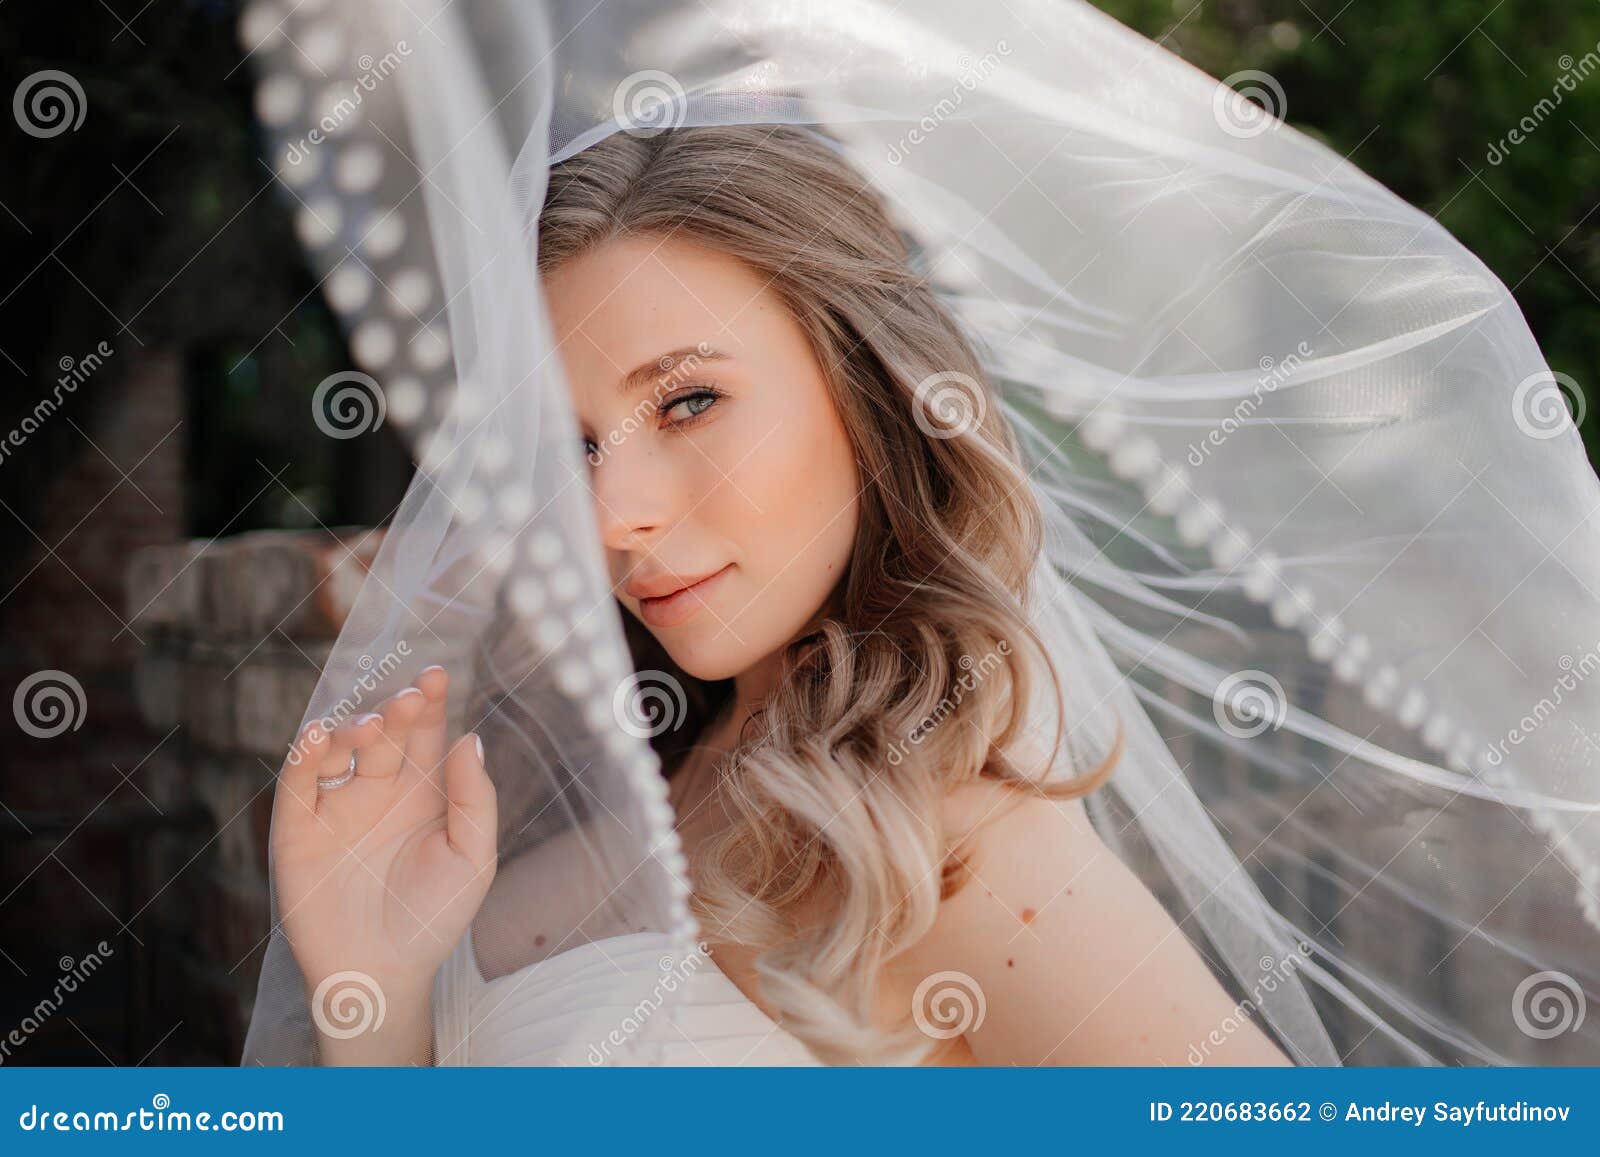 Happy Bride with Long Wavy Hair Under the Veil Outside. Wedding Make-up  Stock Photo - Image of long, glamour: 220683662